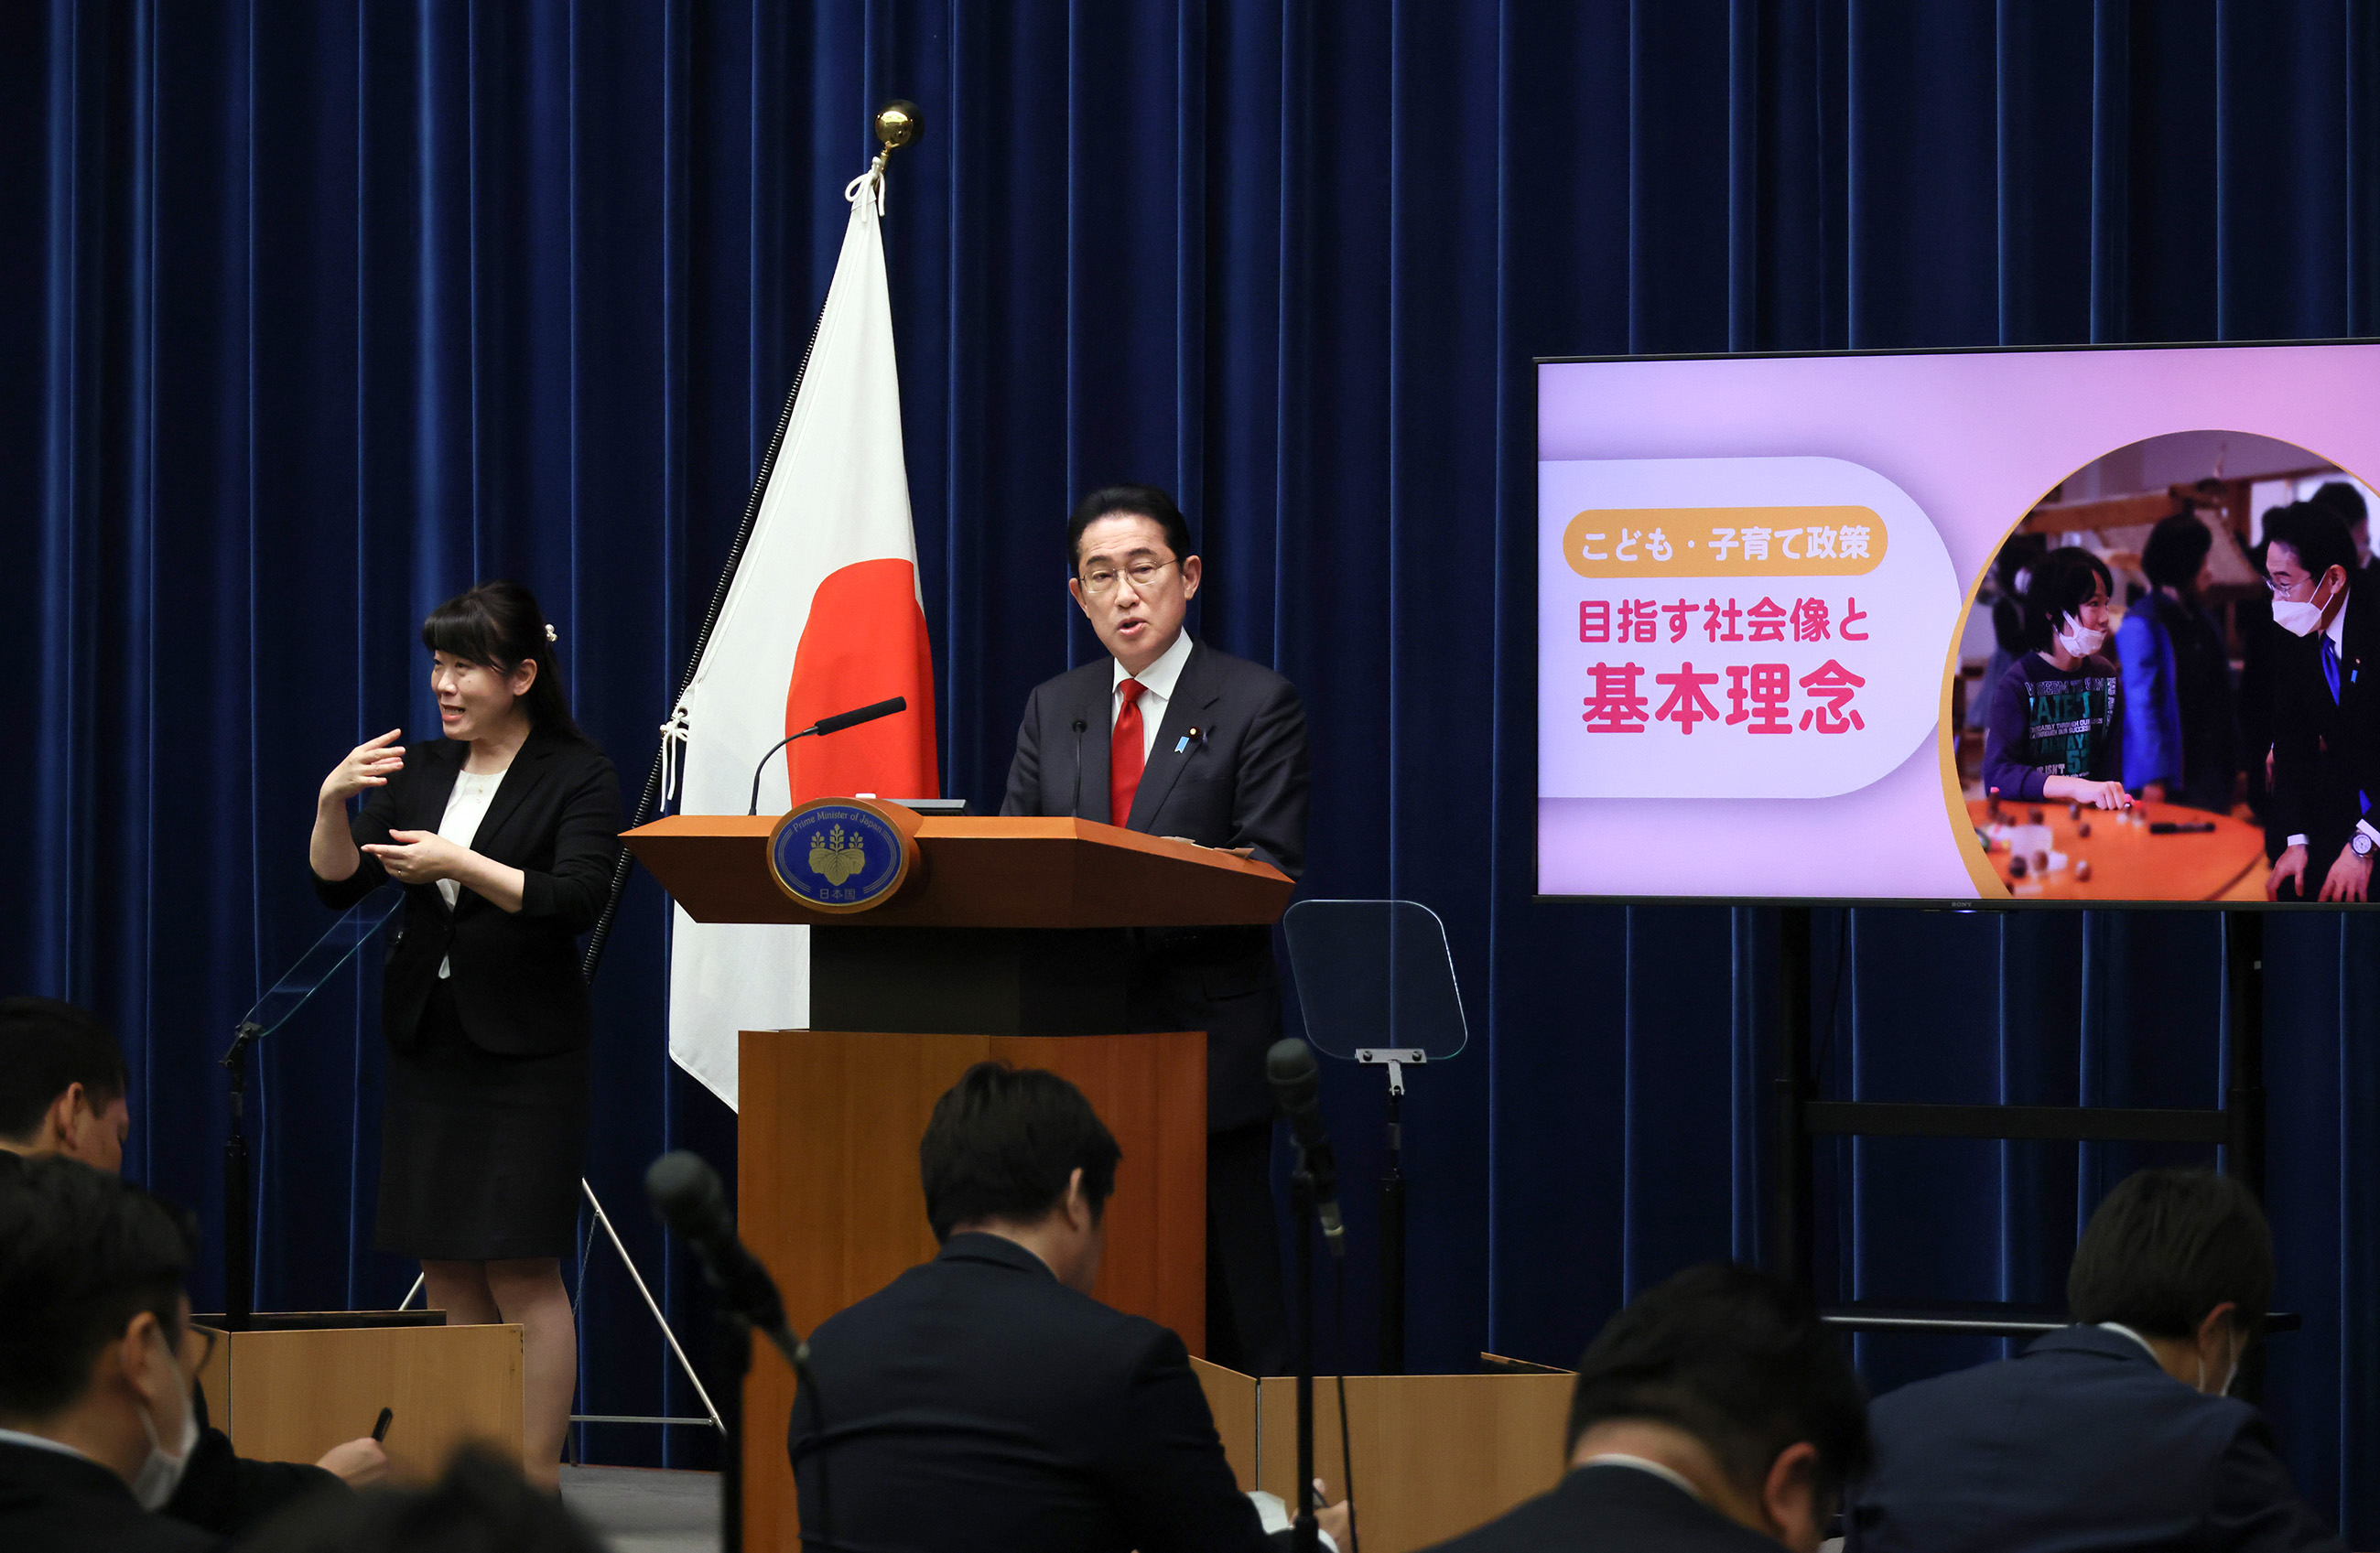 Prime Minister Kishida answering questions from the journalists (4)